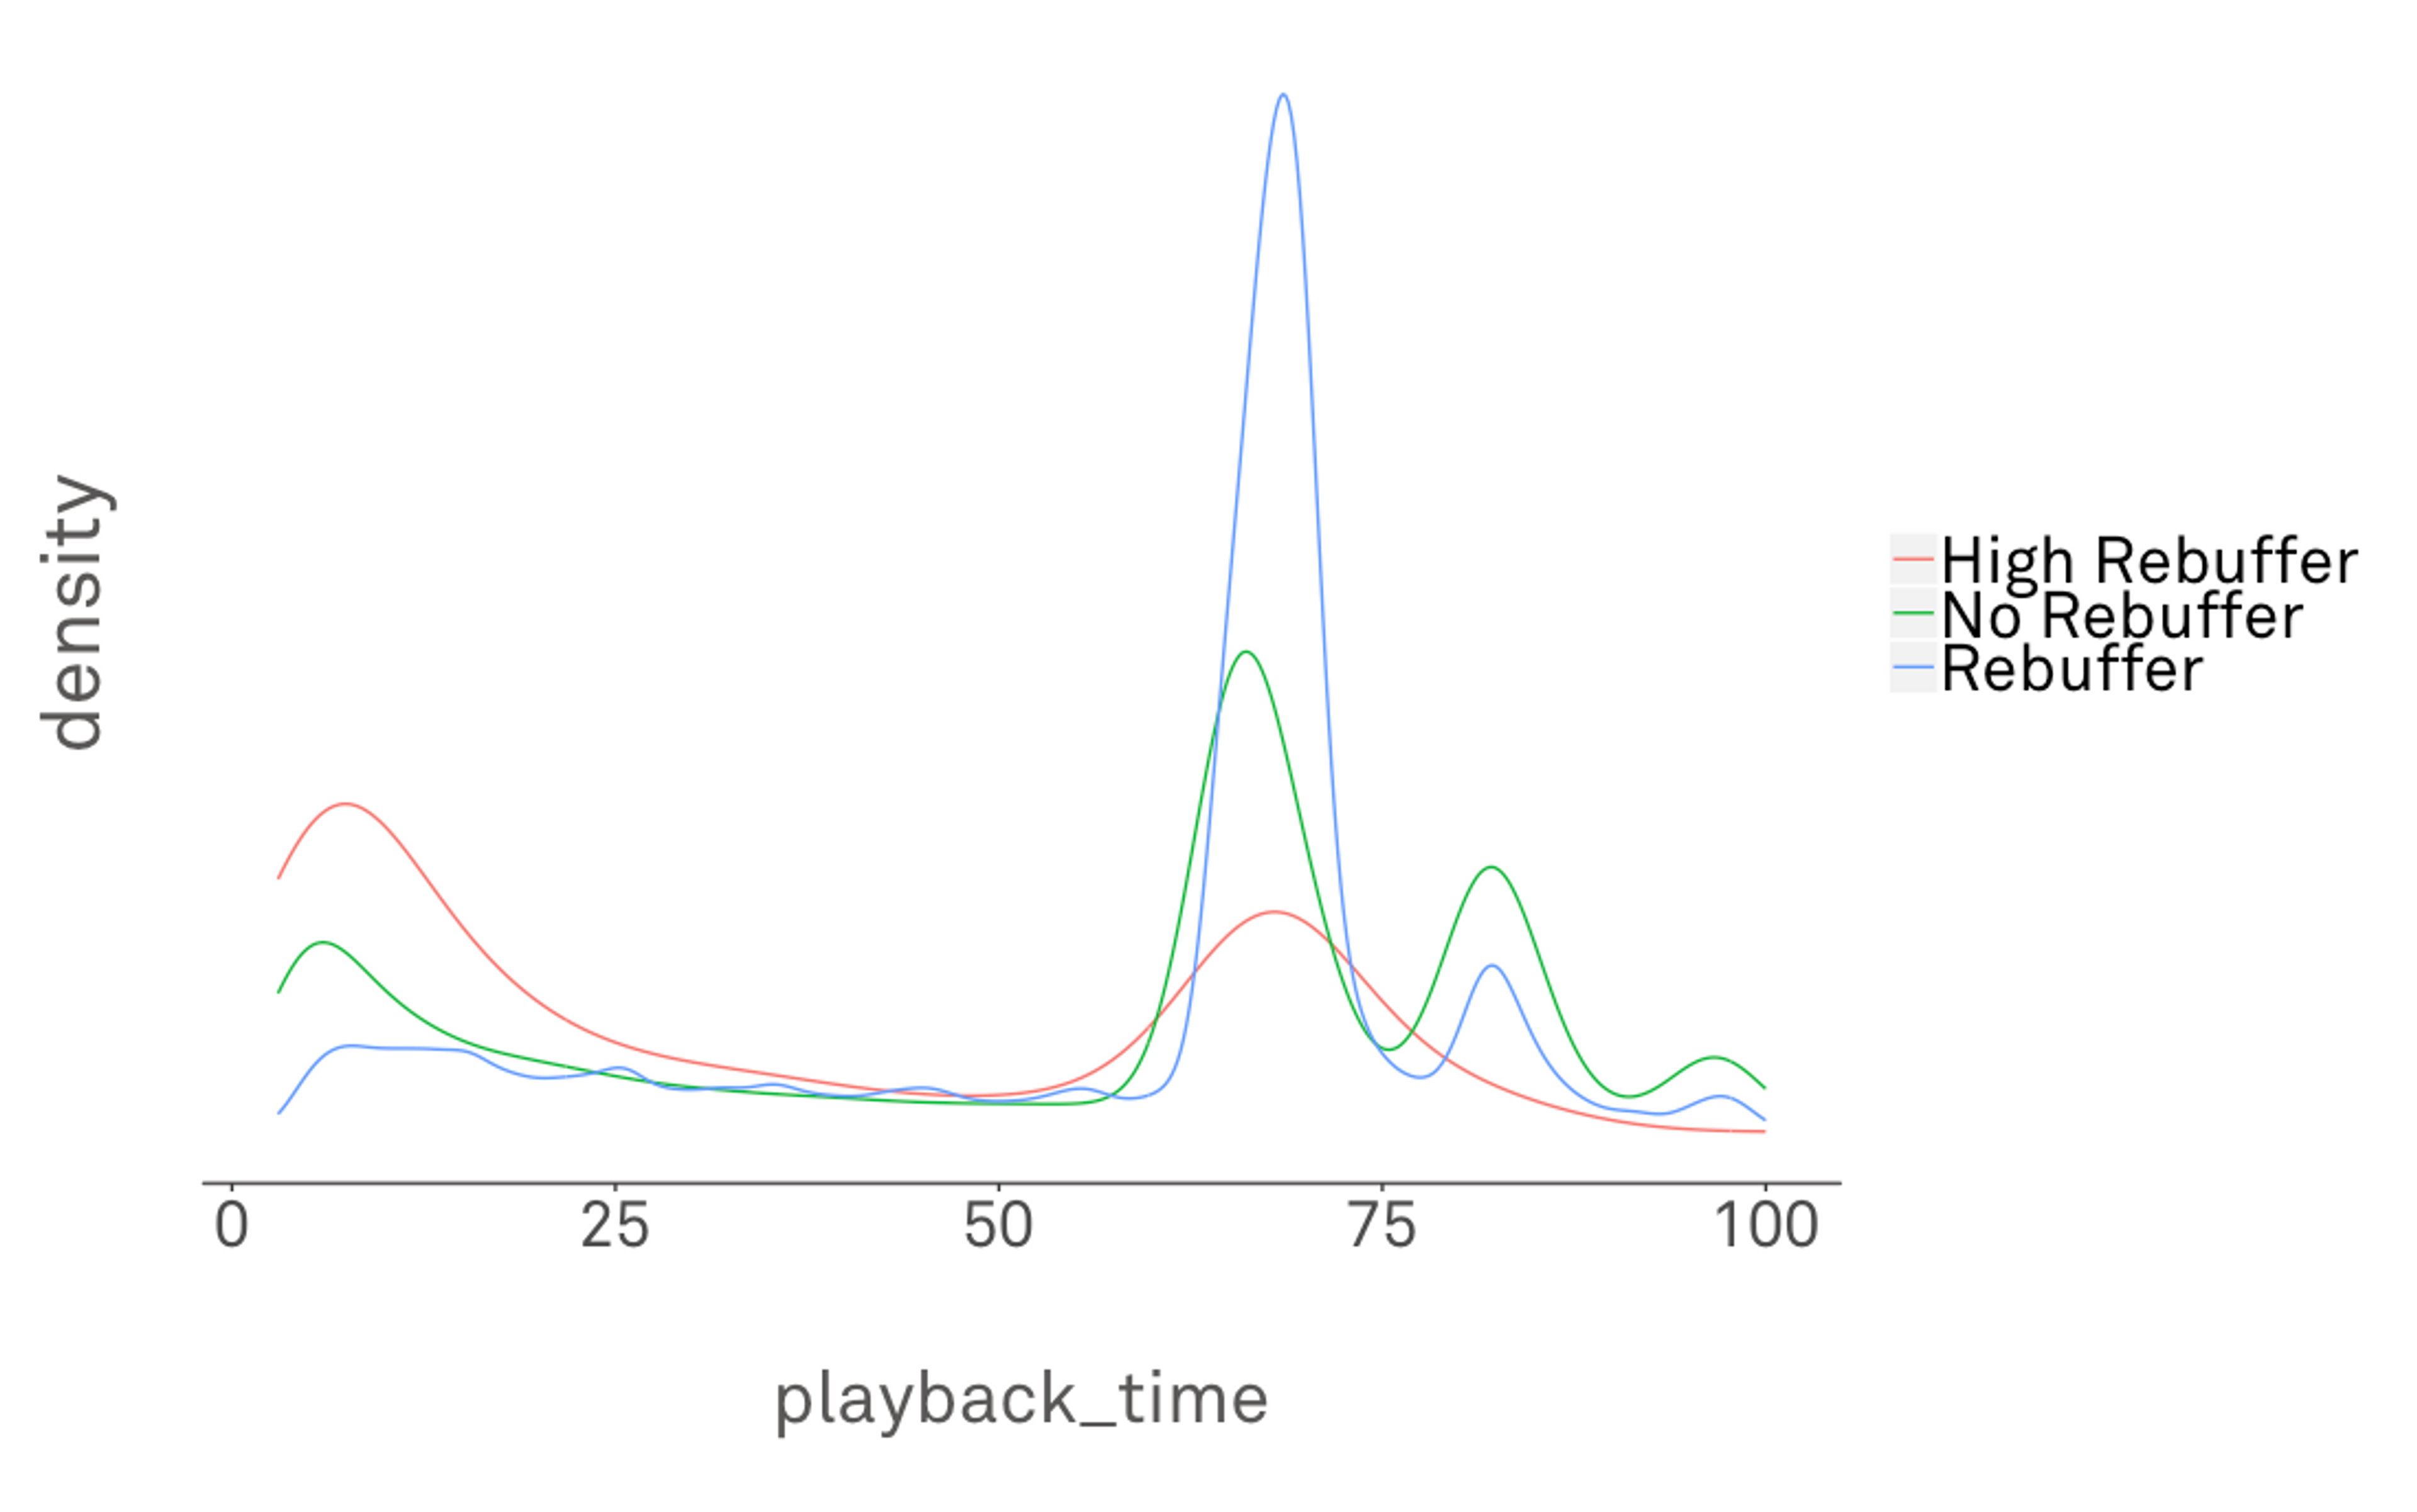 A graph showing the most popular video playback time